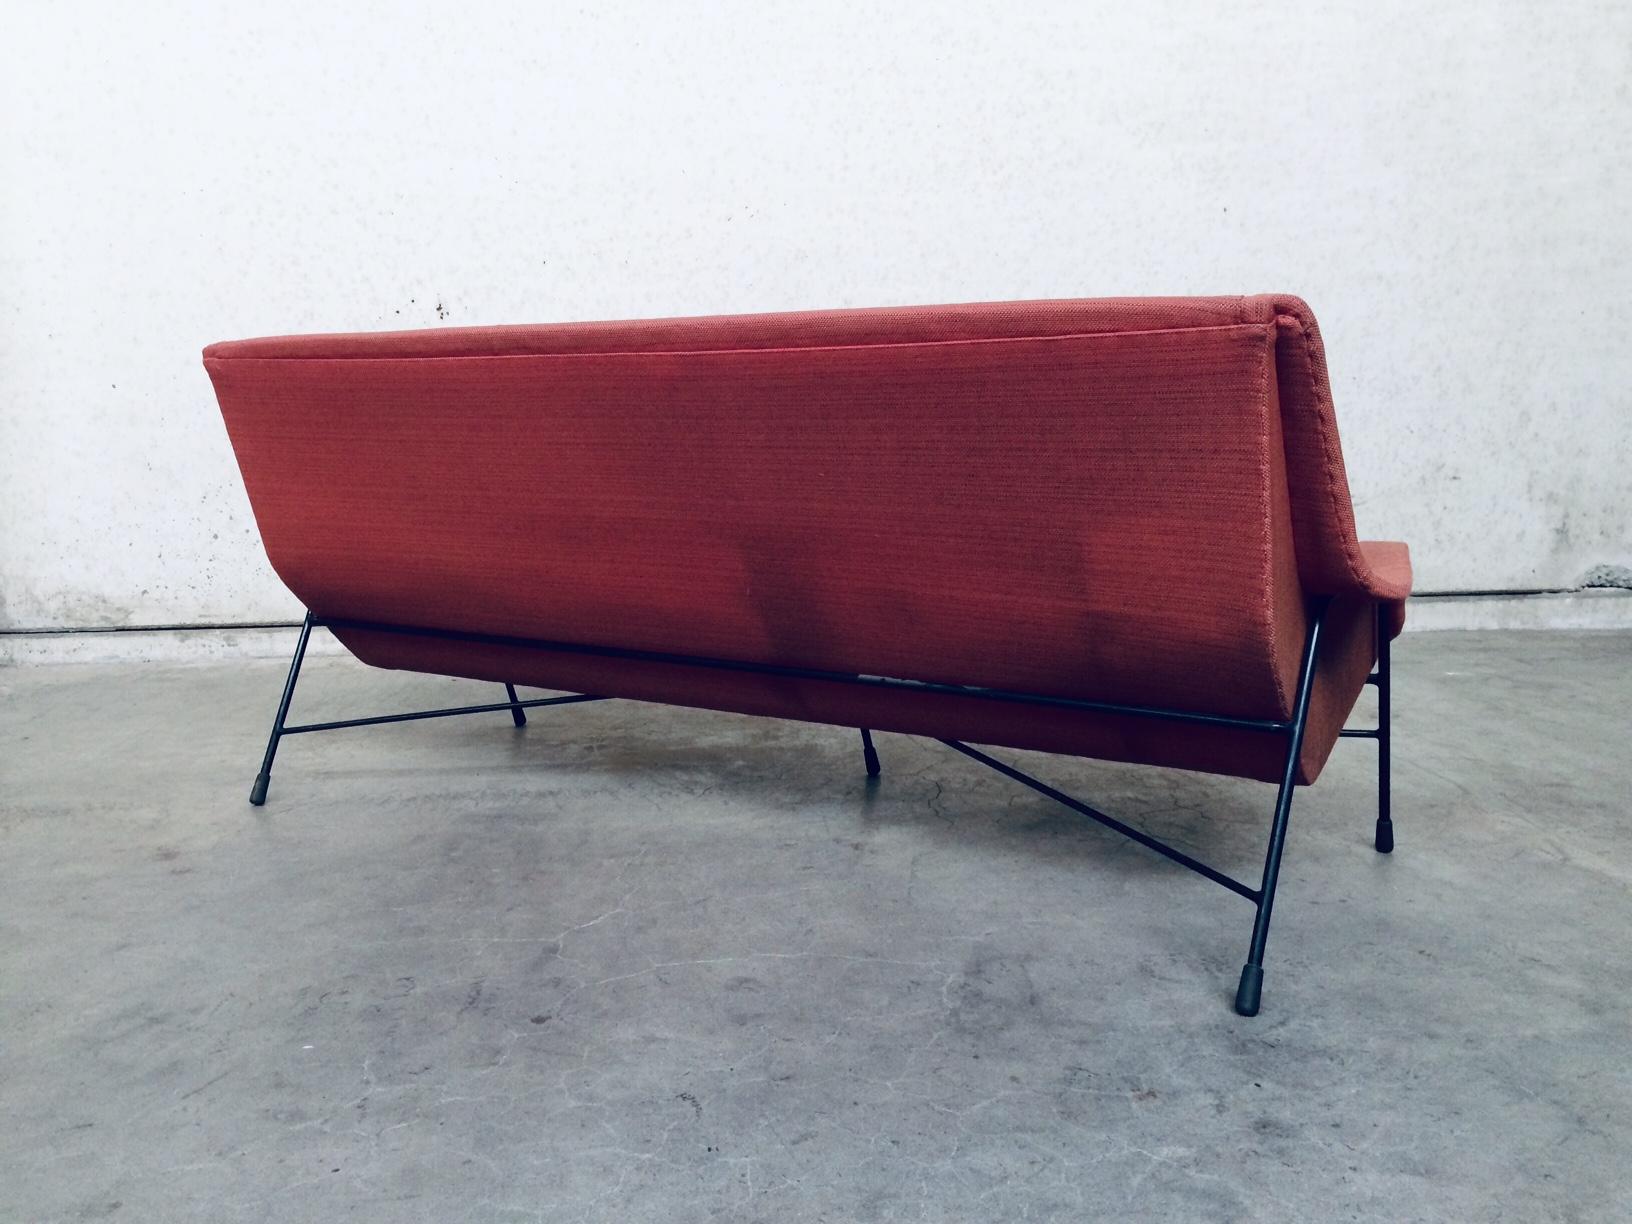 S12 Model 3 Seat Sofa by Alfred Hendrickx for Belform, Belgium, 1958 For Sale 6